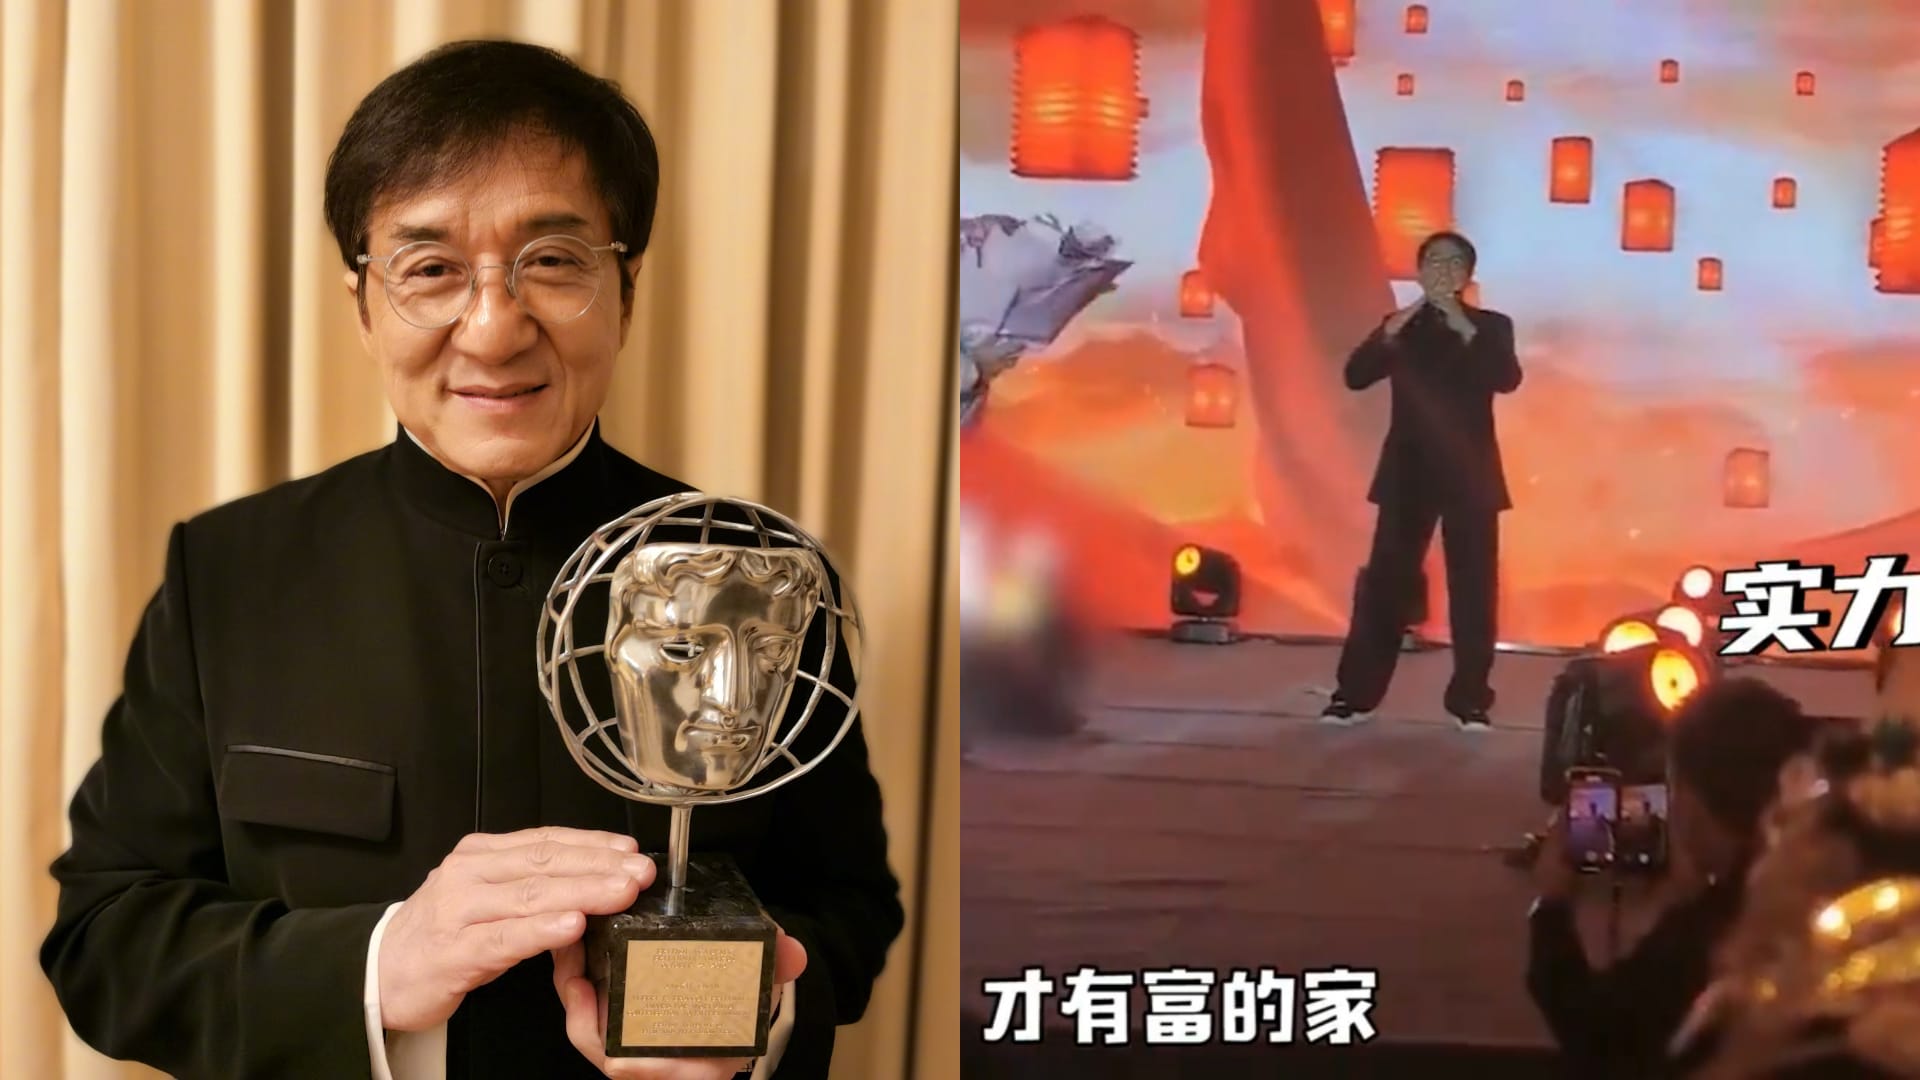 Video Of Jackie Chan Performing At Small, Messy Event Has Netizens Wondering If He Really Needs The Extra Cash